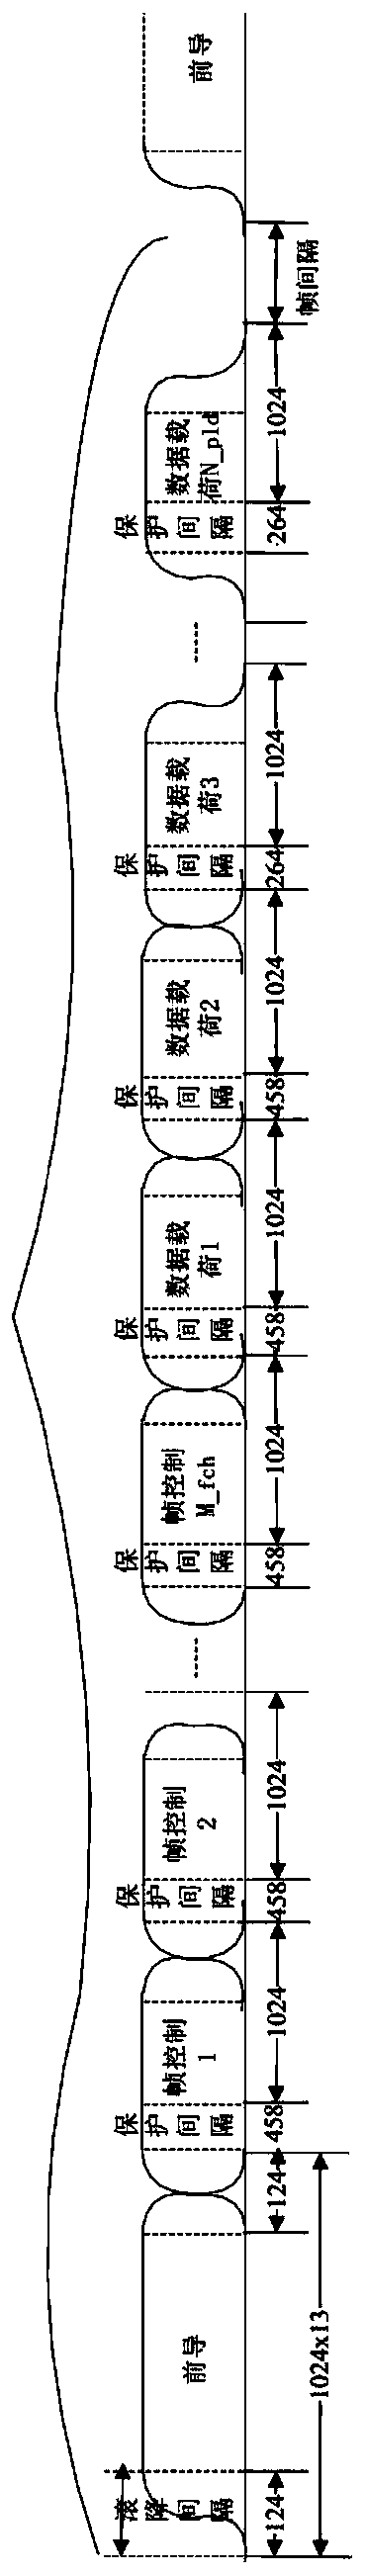 Method for frequency domain information extension of data symbols in power line carrier communication